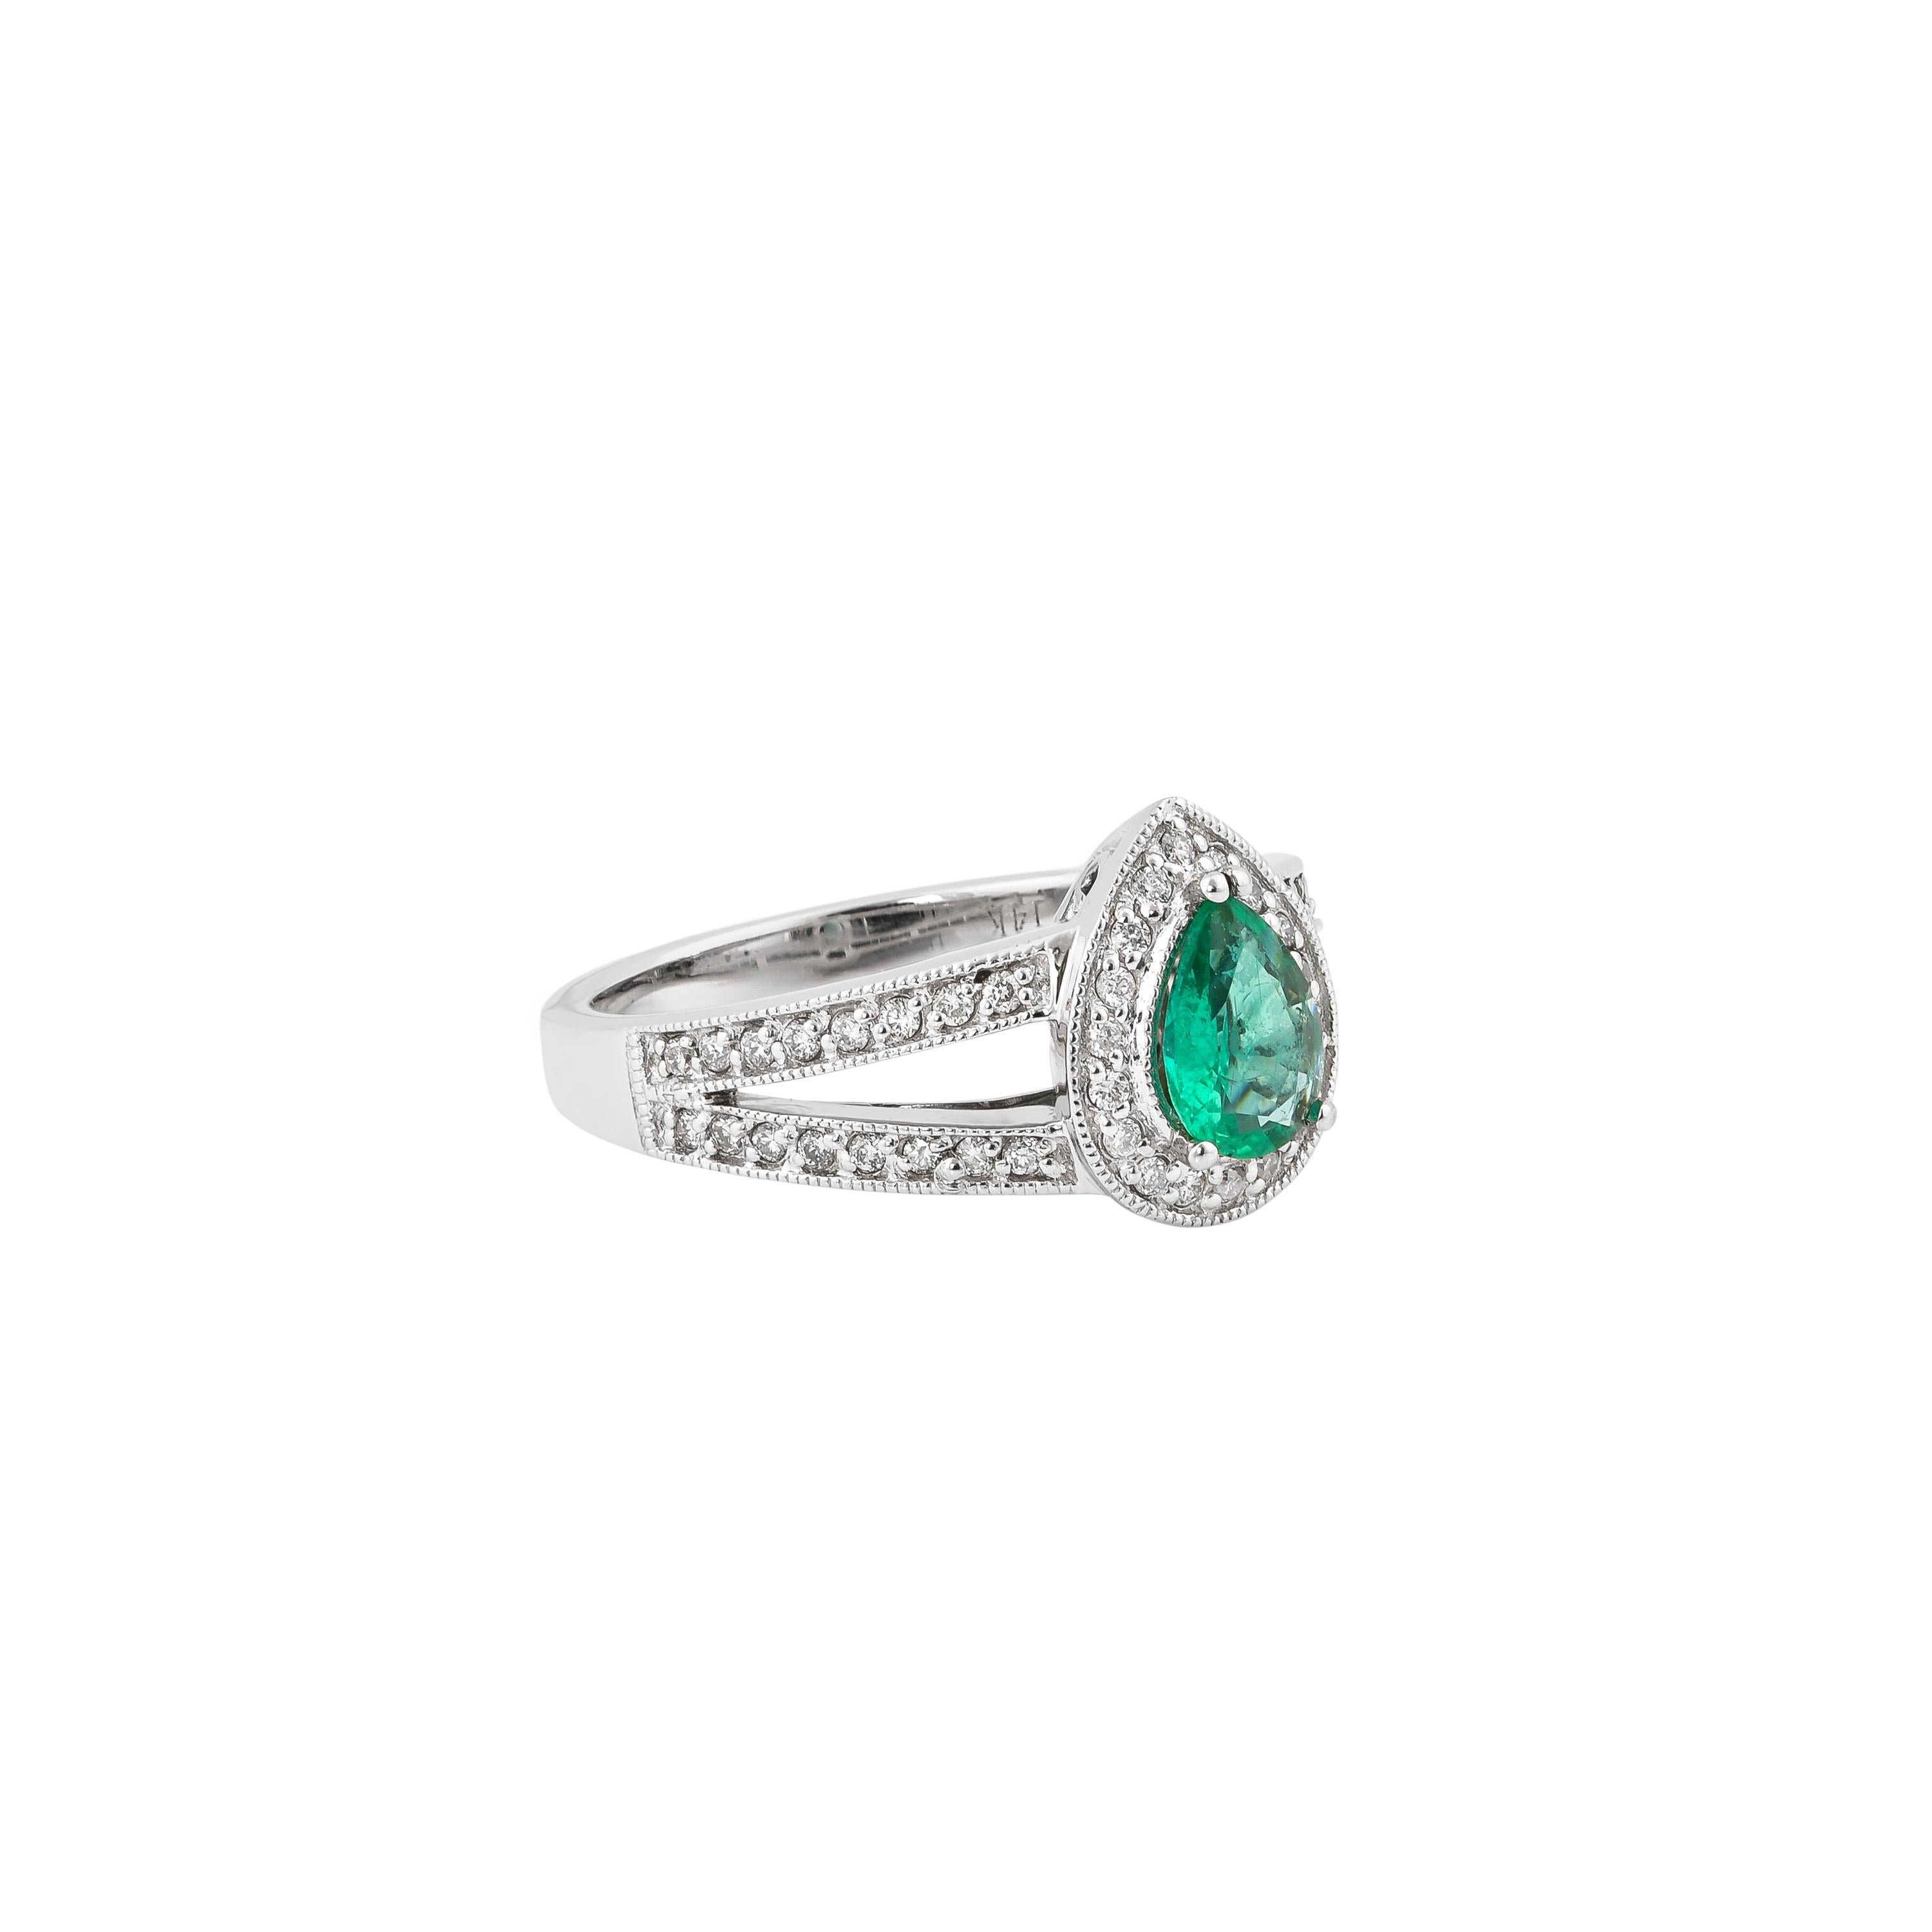 Classic rings with precious gemstones. We present a collection of everyday rings with either blue sapphire, emerald, or ruby that are accented with diamonds. These are gorgeous bridal and engagement rings to give to your loved one. 

Classic emerald